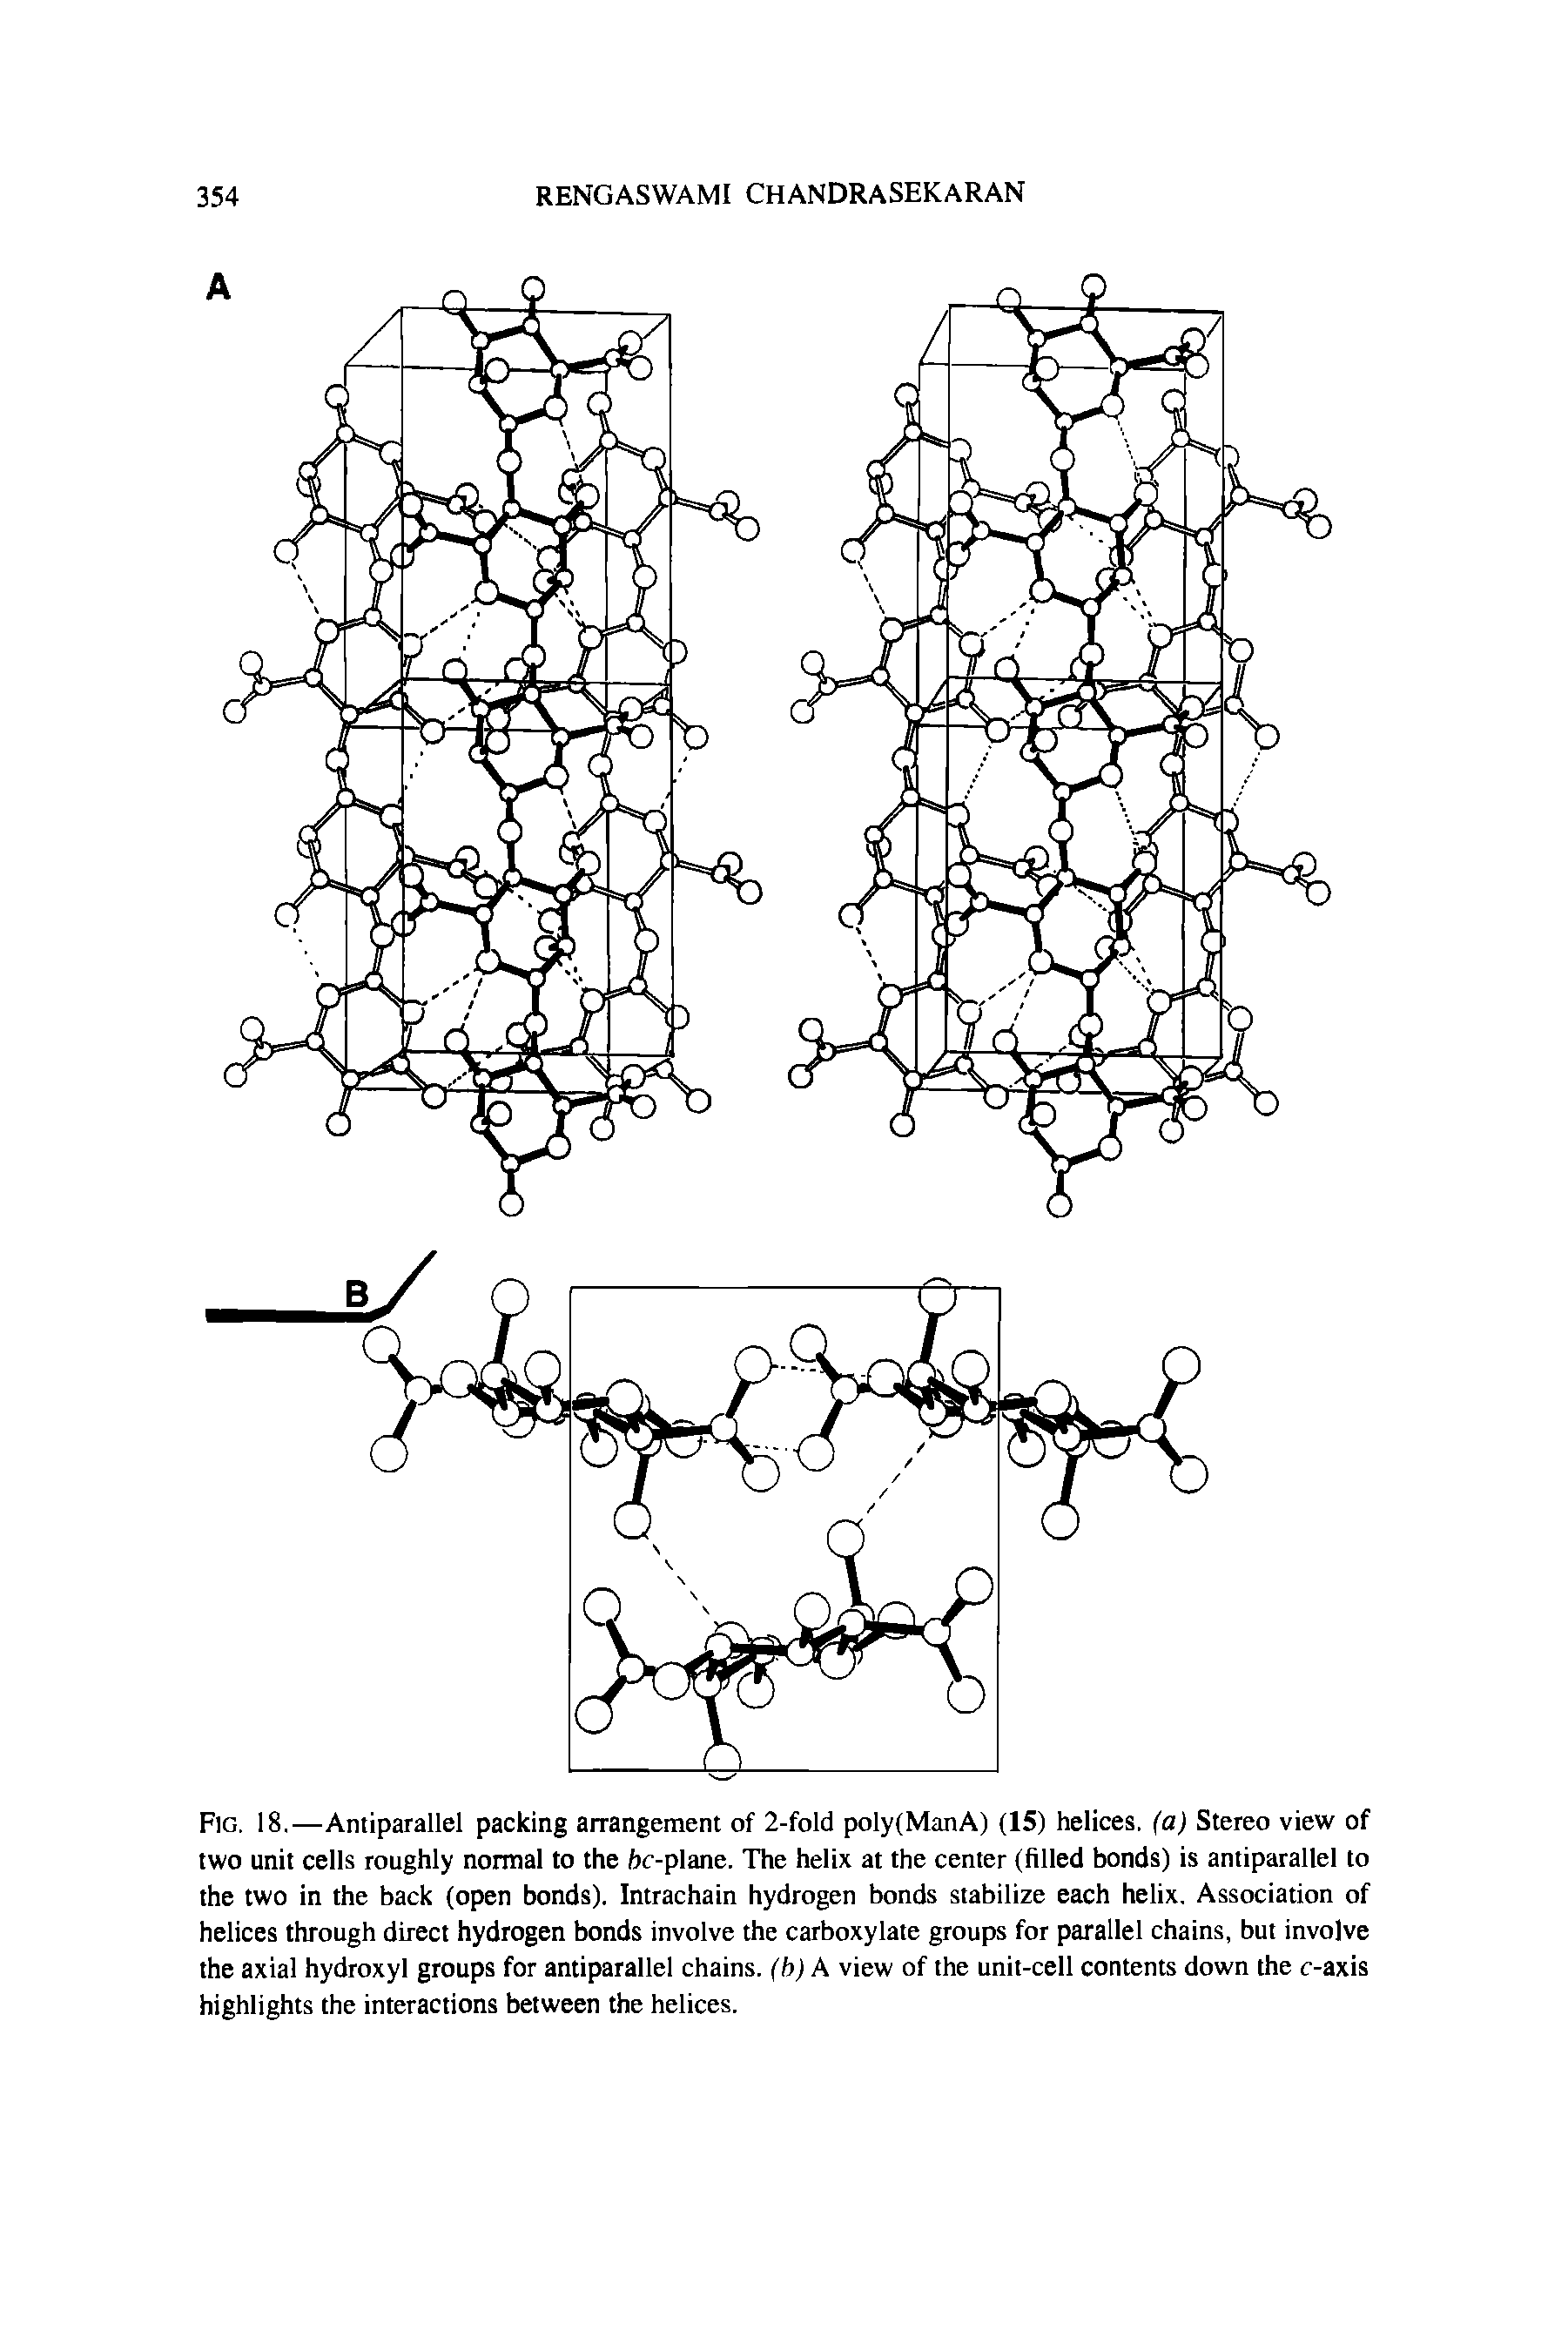 Fig. 18.—Antiparallel packing arrangement of 2-fold poly(ManA) (15) helices, (a) Stereo view of two unit cells roughly normal to the hoplane. The helix at the center (filled bonds) is antiparallel to the two in the back (open bonds). Intrachain hydrogen bonds stabilize each helix. Association of helices through direct hydrogen bonds involve the carboxylate groups for parallel chains, but involve the axial hydroxyl groups for antiparallel chains, (b) A view of the unit-cell contents down the t-axis highlights the interactions between the helices.